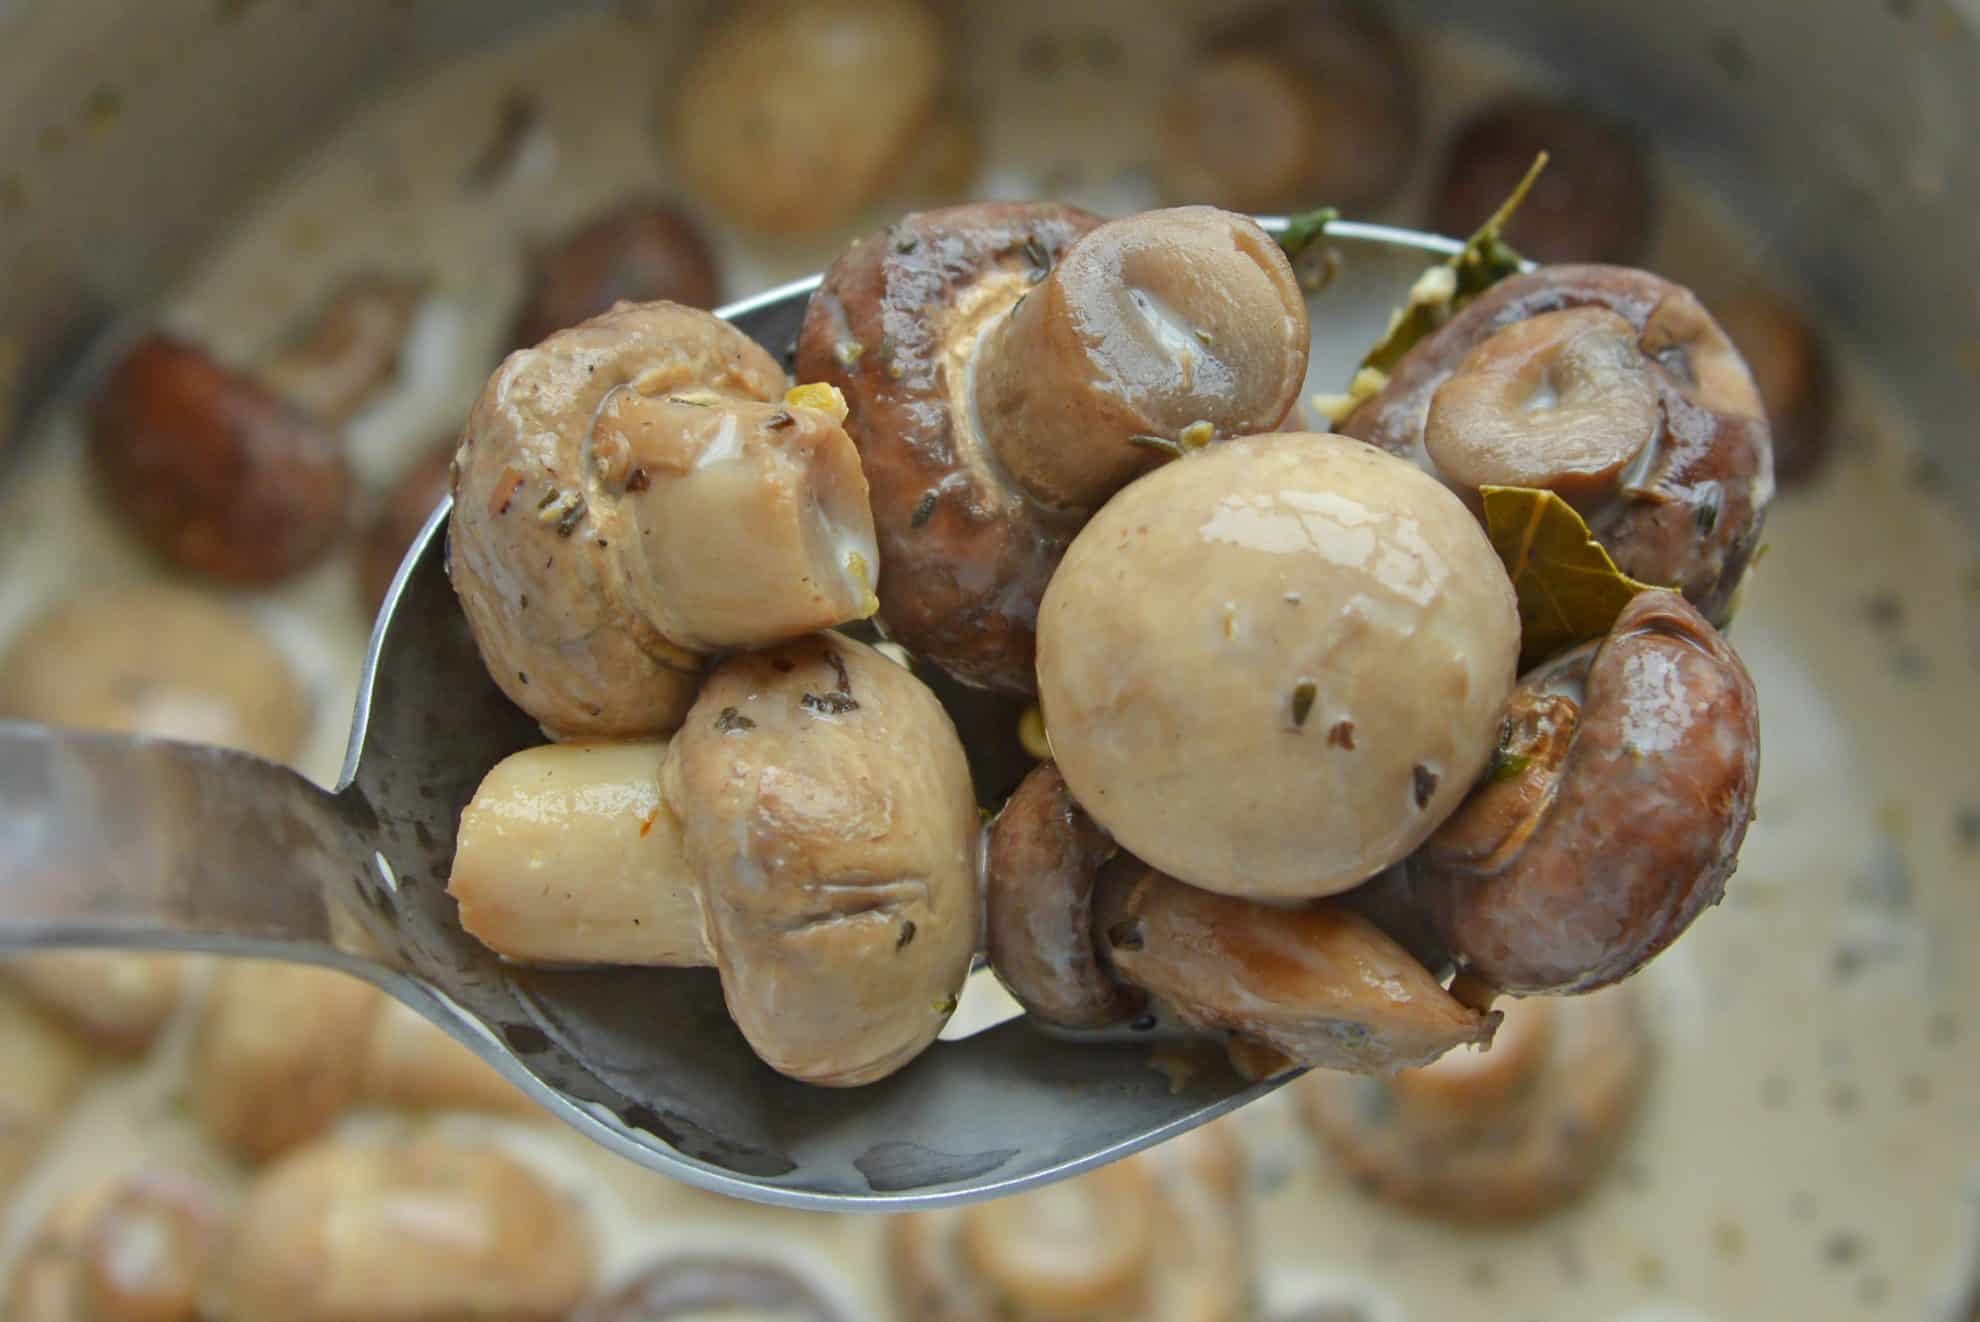 Sauteed mushrooms in a serving spoon